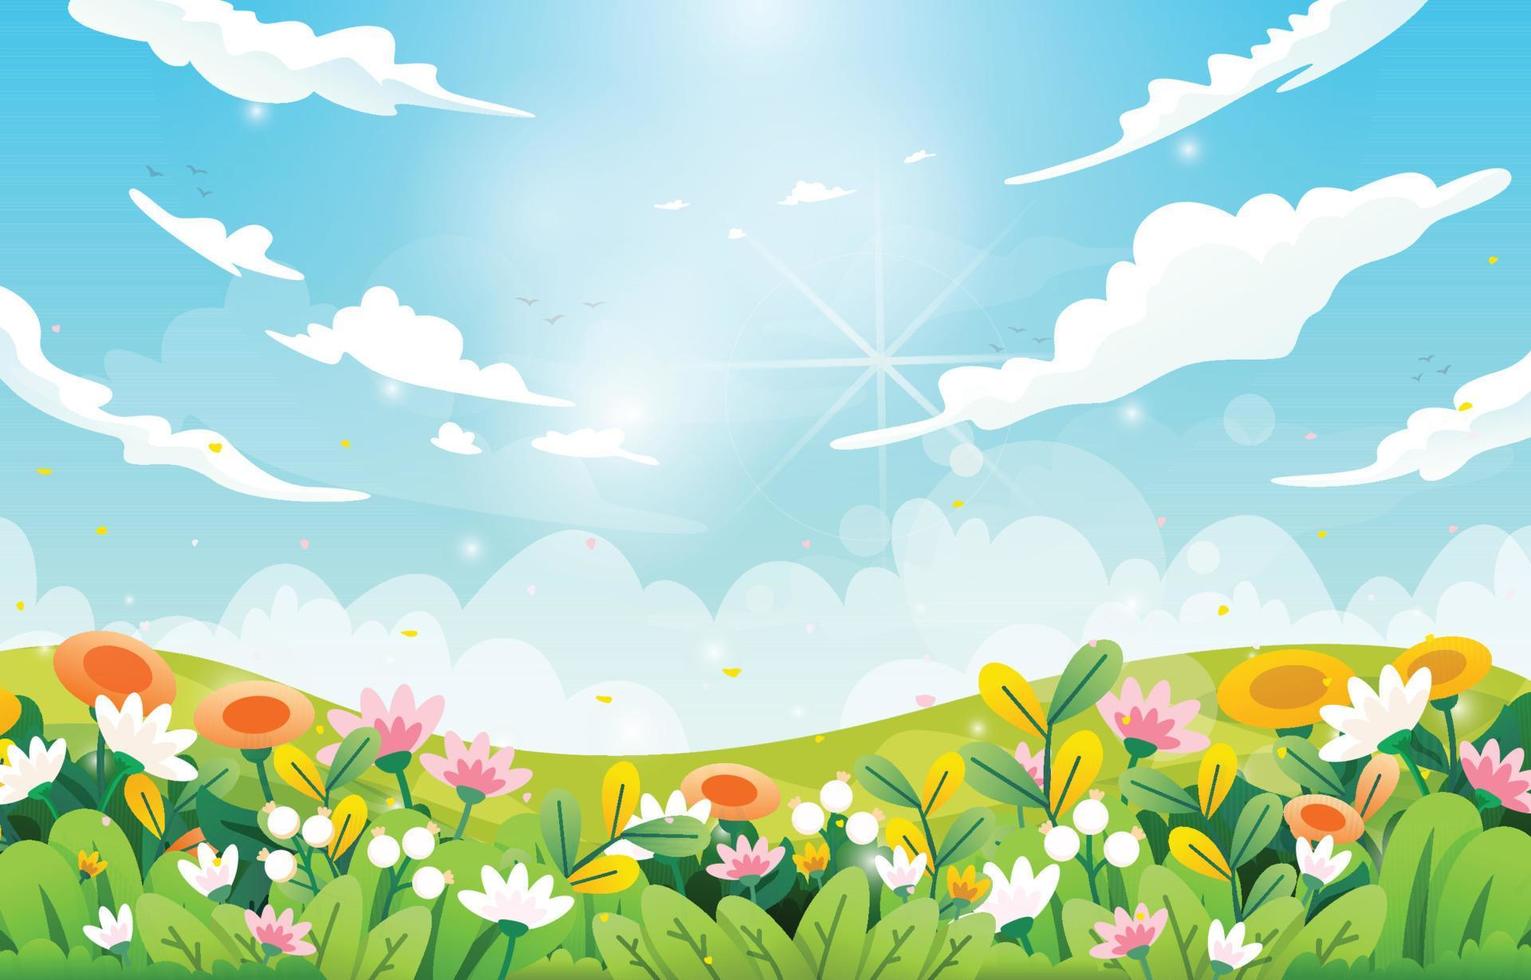 Nature Spring Landscape with Blooming Flower and Blue Sky vector